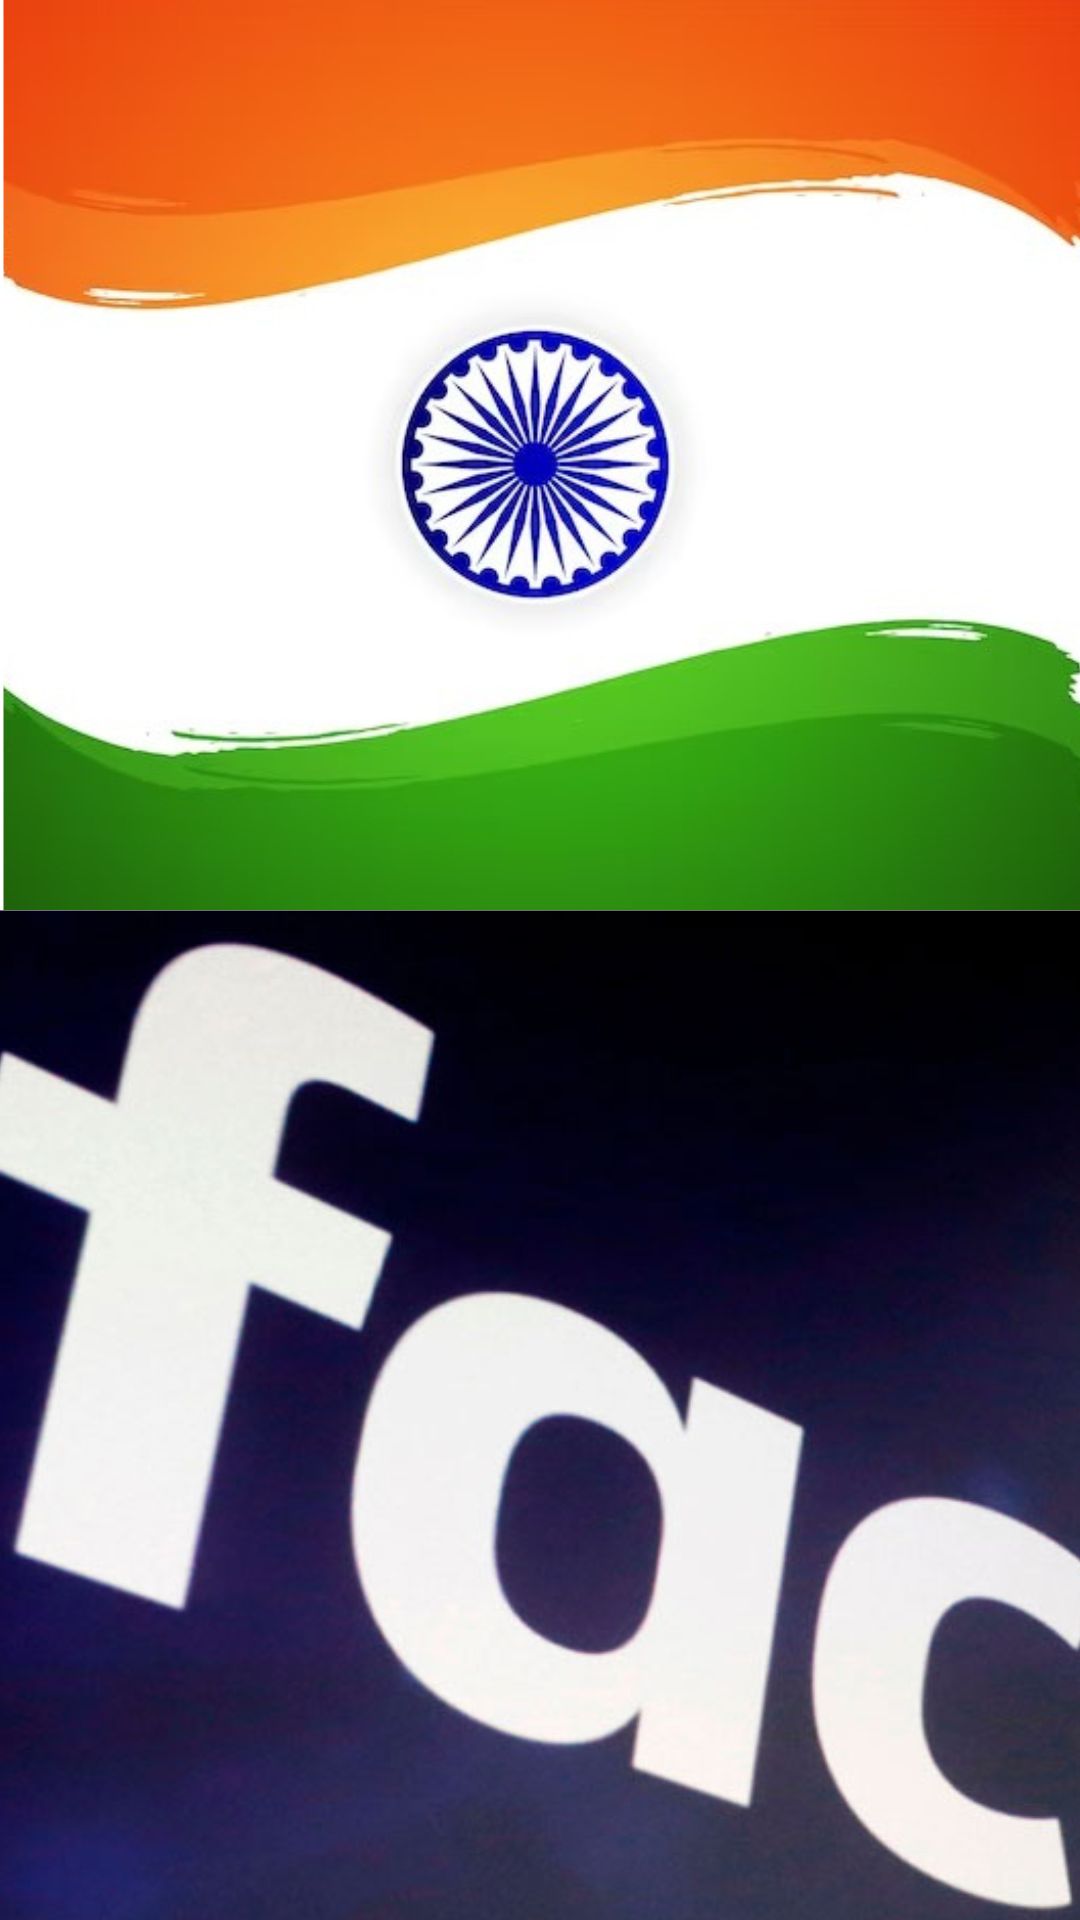 Decorate your Facebook profile picture with the Tiranga &ndash; Here's how
